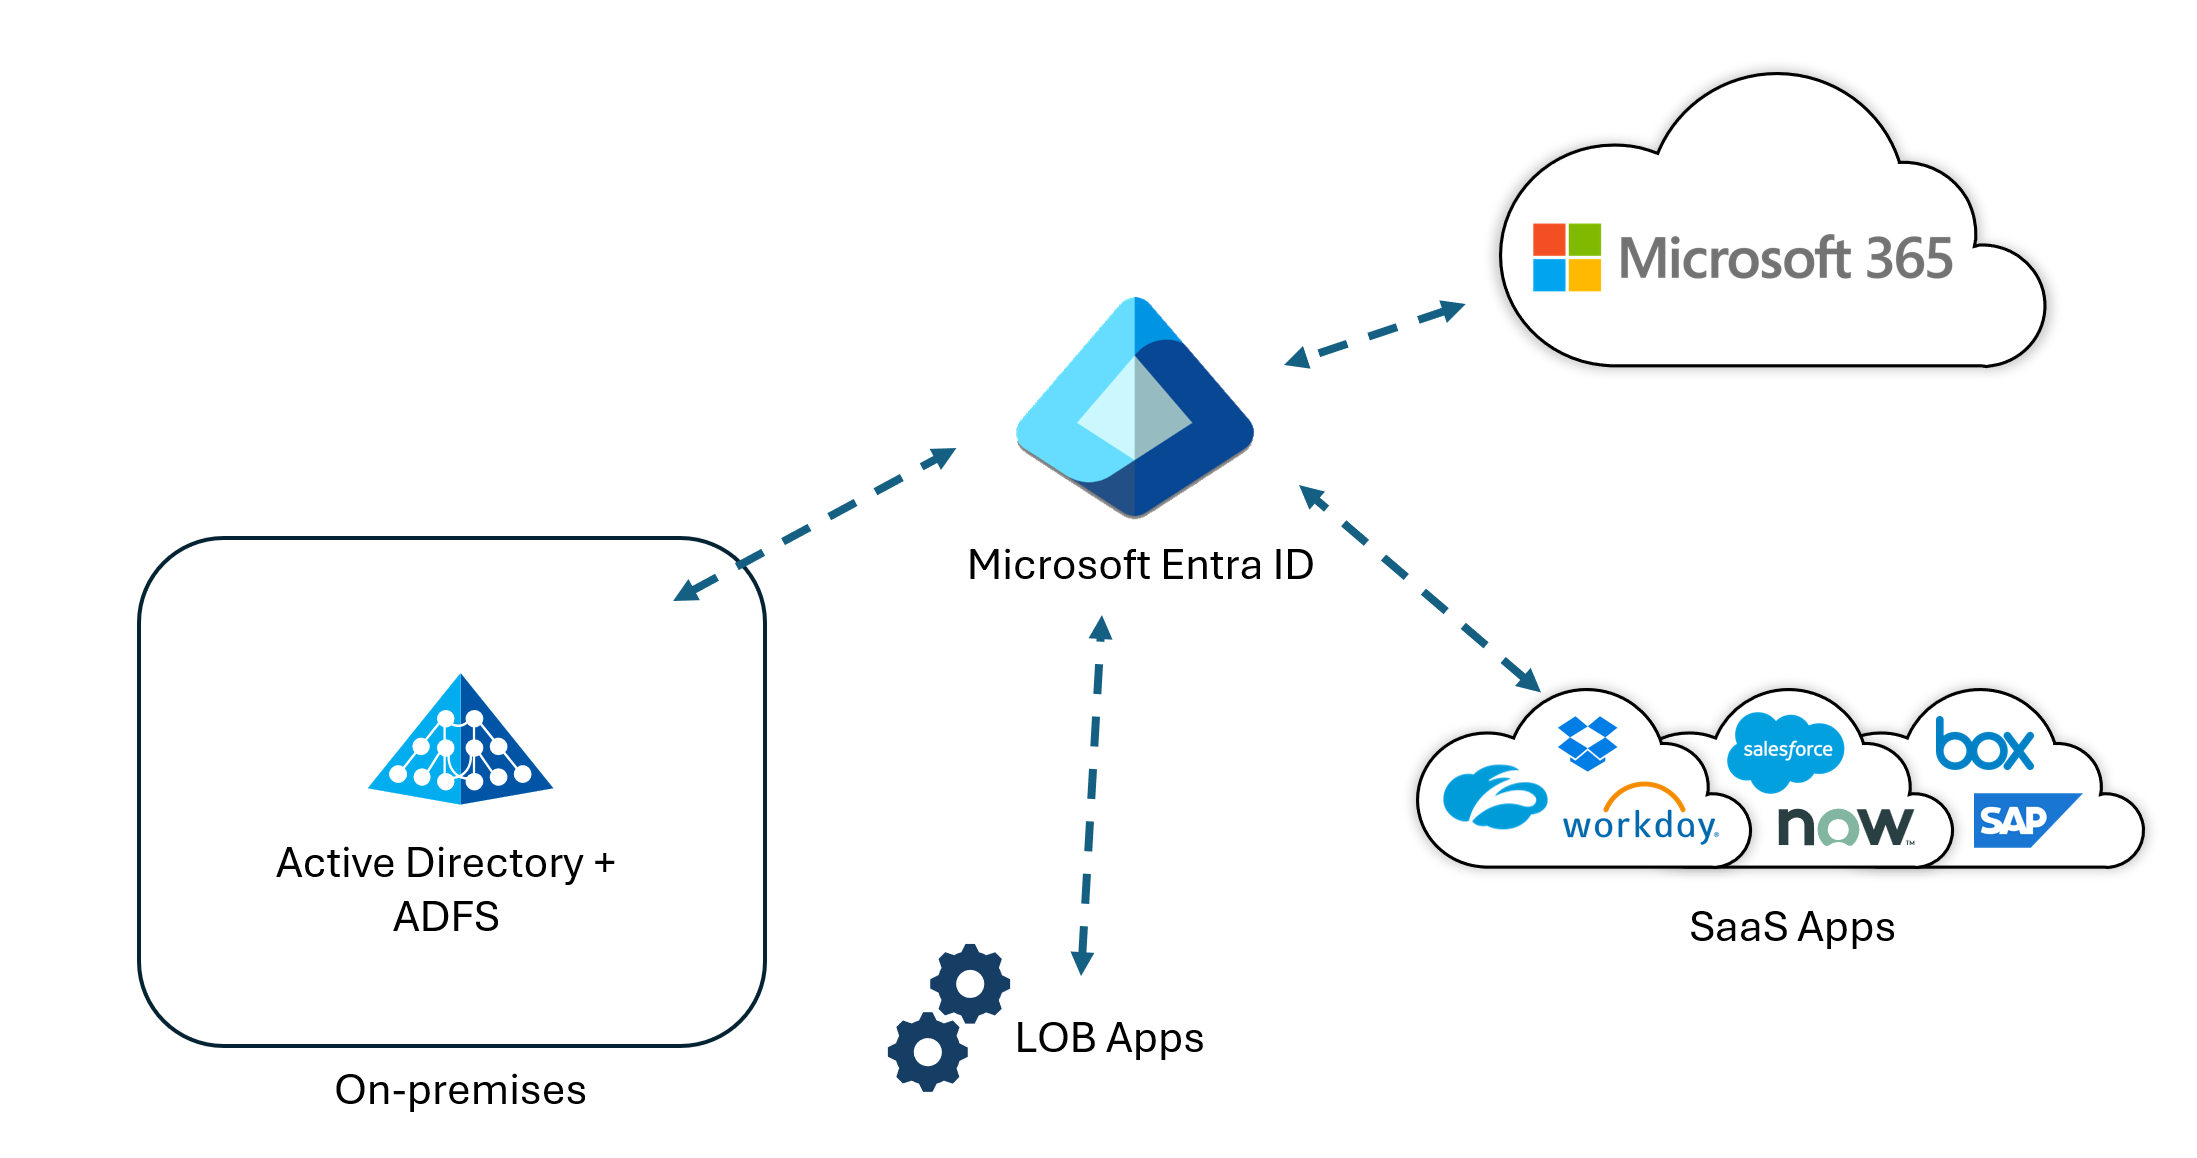 Microsoft Entra ID as the primary identity provider